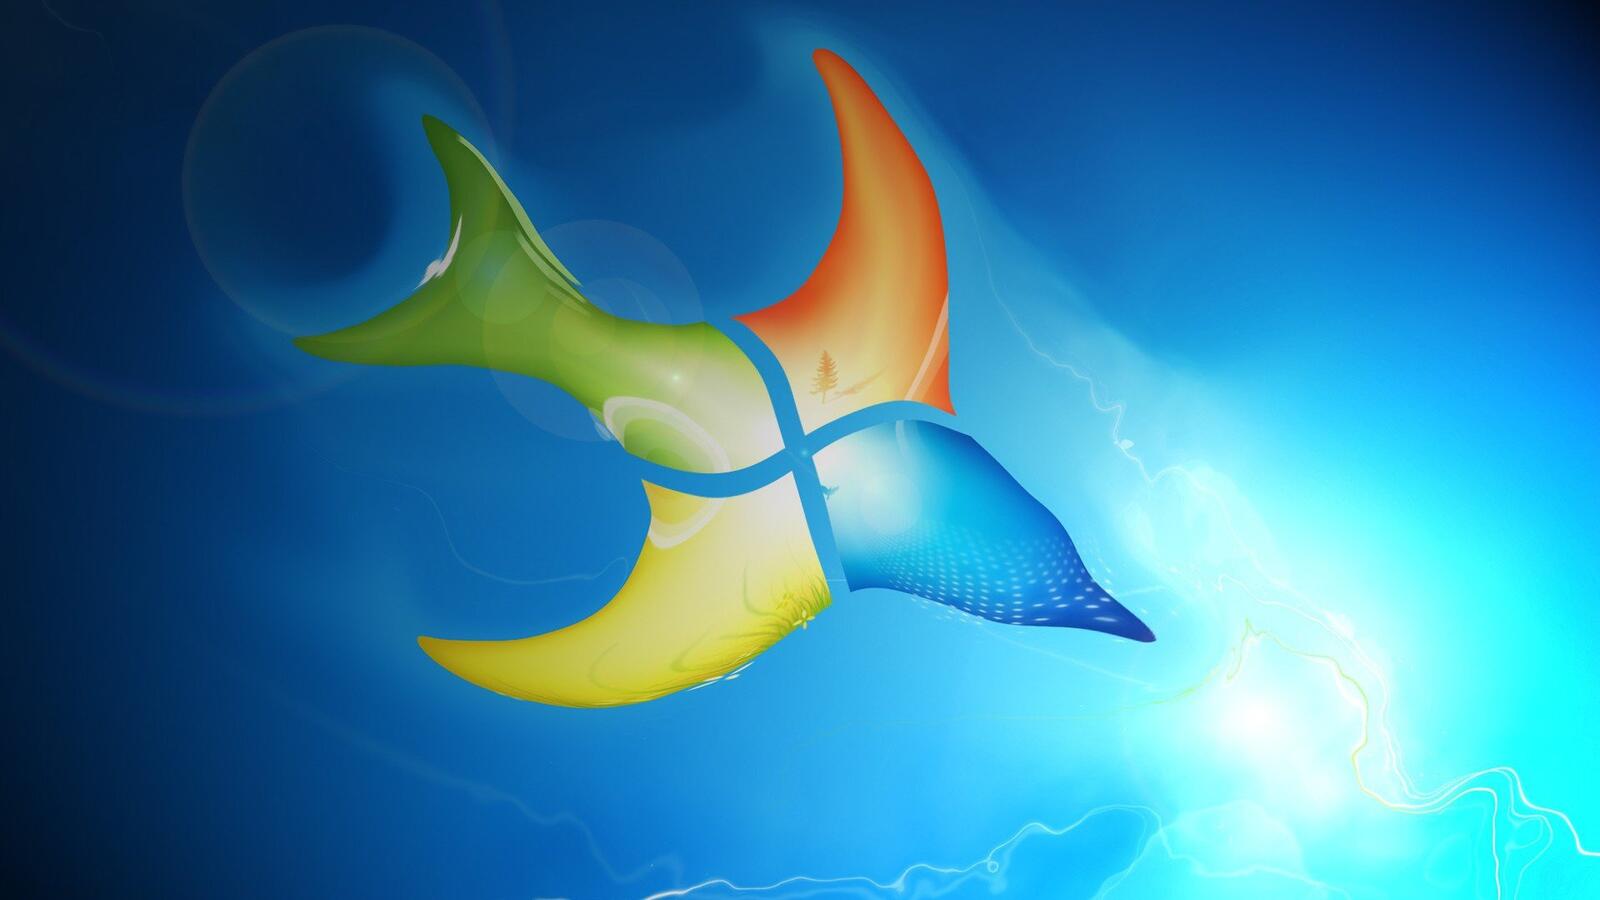 Free photo Windows 7 logo in the form of a bird